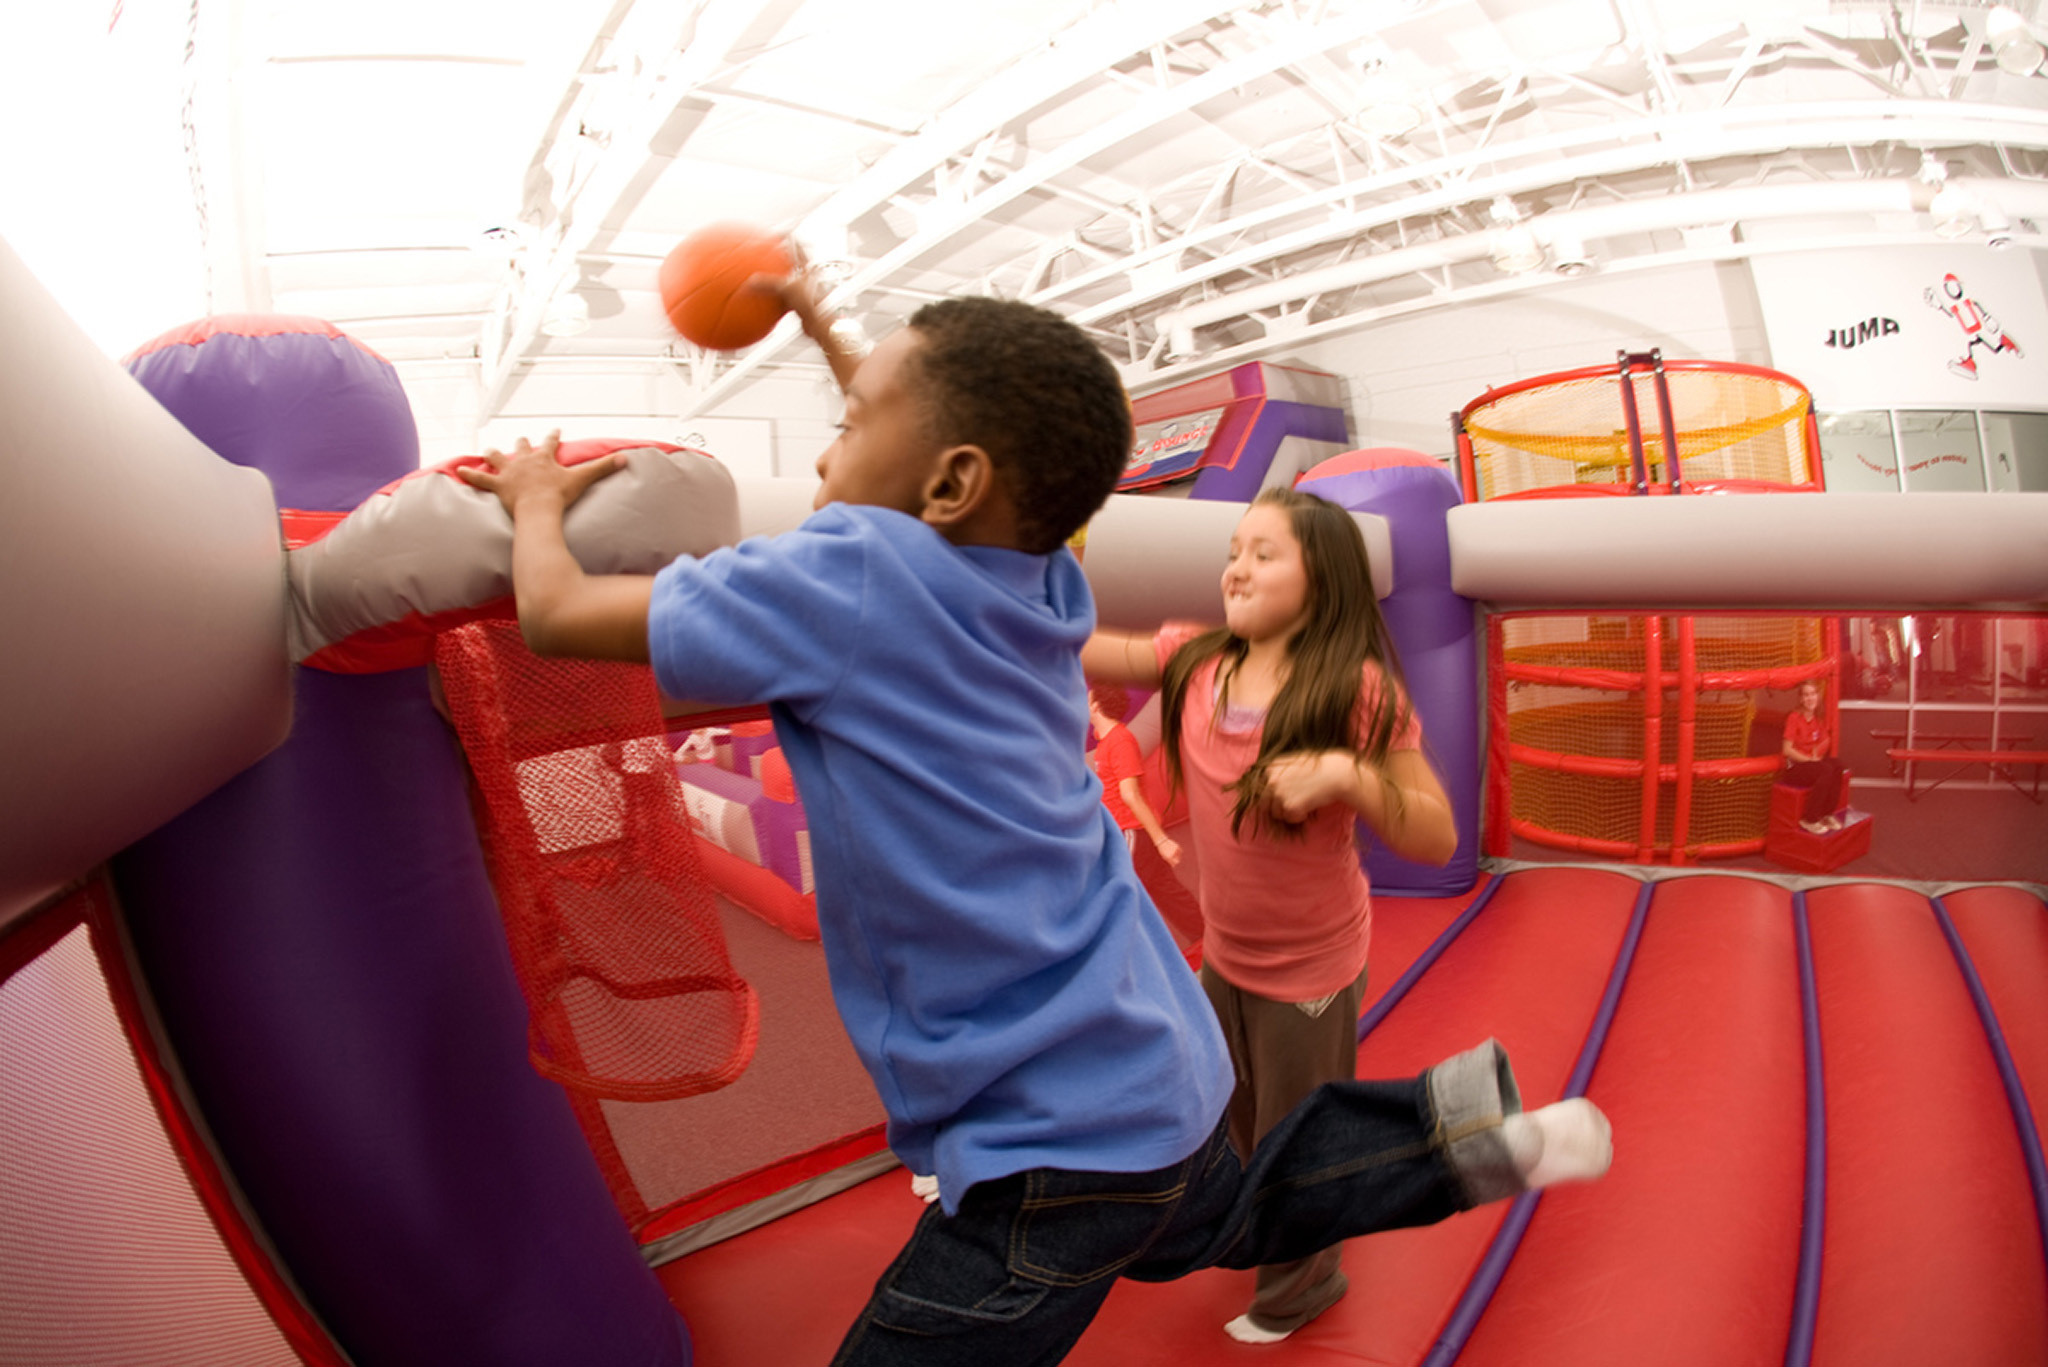 Kids Birthday Party Place Brooklyn
 Best kids birthday party places in New York City